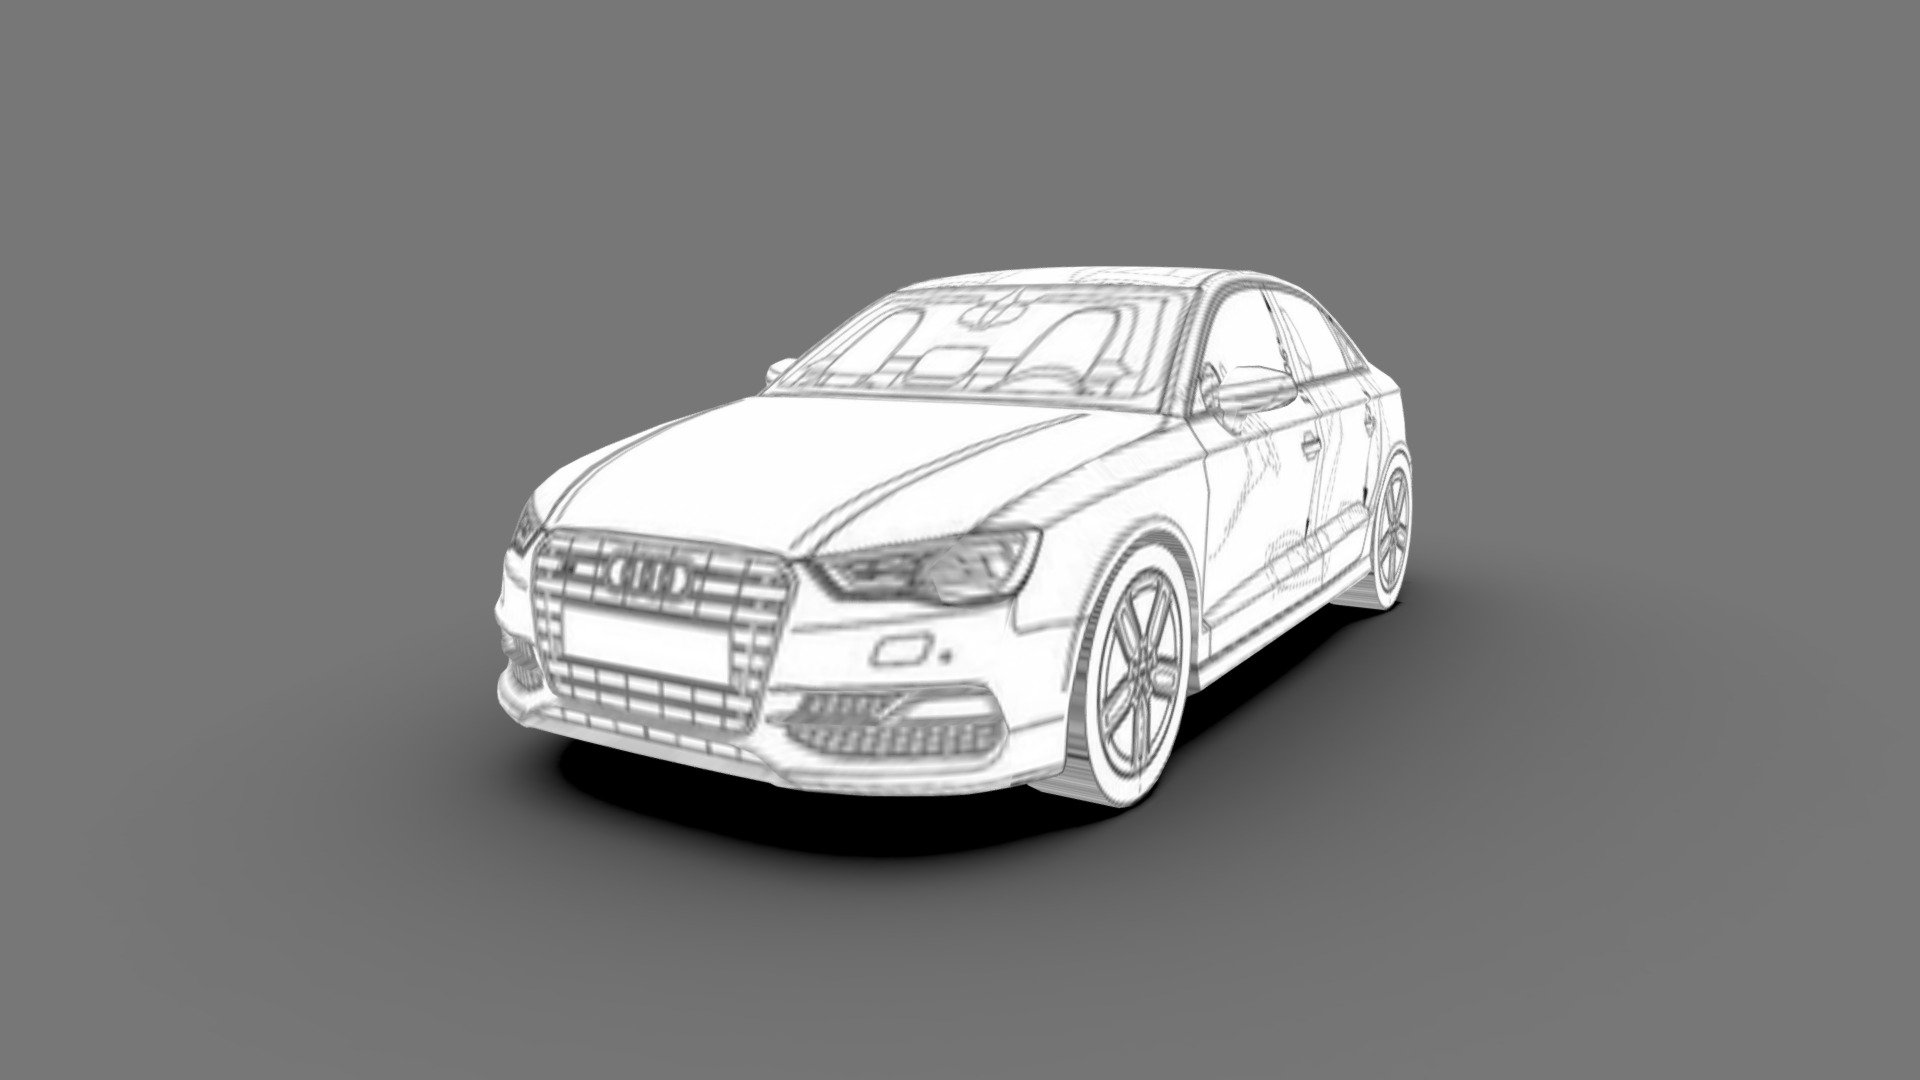 Low-poly, full-scale 3d blueprint model of the Audi A3/S3 Limousine

Save time on modeling and just spend on customization tailored to your specific needs.
Your work gets very simplified due to the texture applied to the model, which is the blueprint itself.
You can also use the model directly in architectural or design projects.

Package includes 5 file formats and texture (3ds, fbx, dae, obj and skp)

Hope you enjoy it.
José Bronze - Audi A3 Limousine 3d blueprint - Buy Royalty Free 3D model by Jose Bronze (@pinceladas3d) 3d model